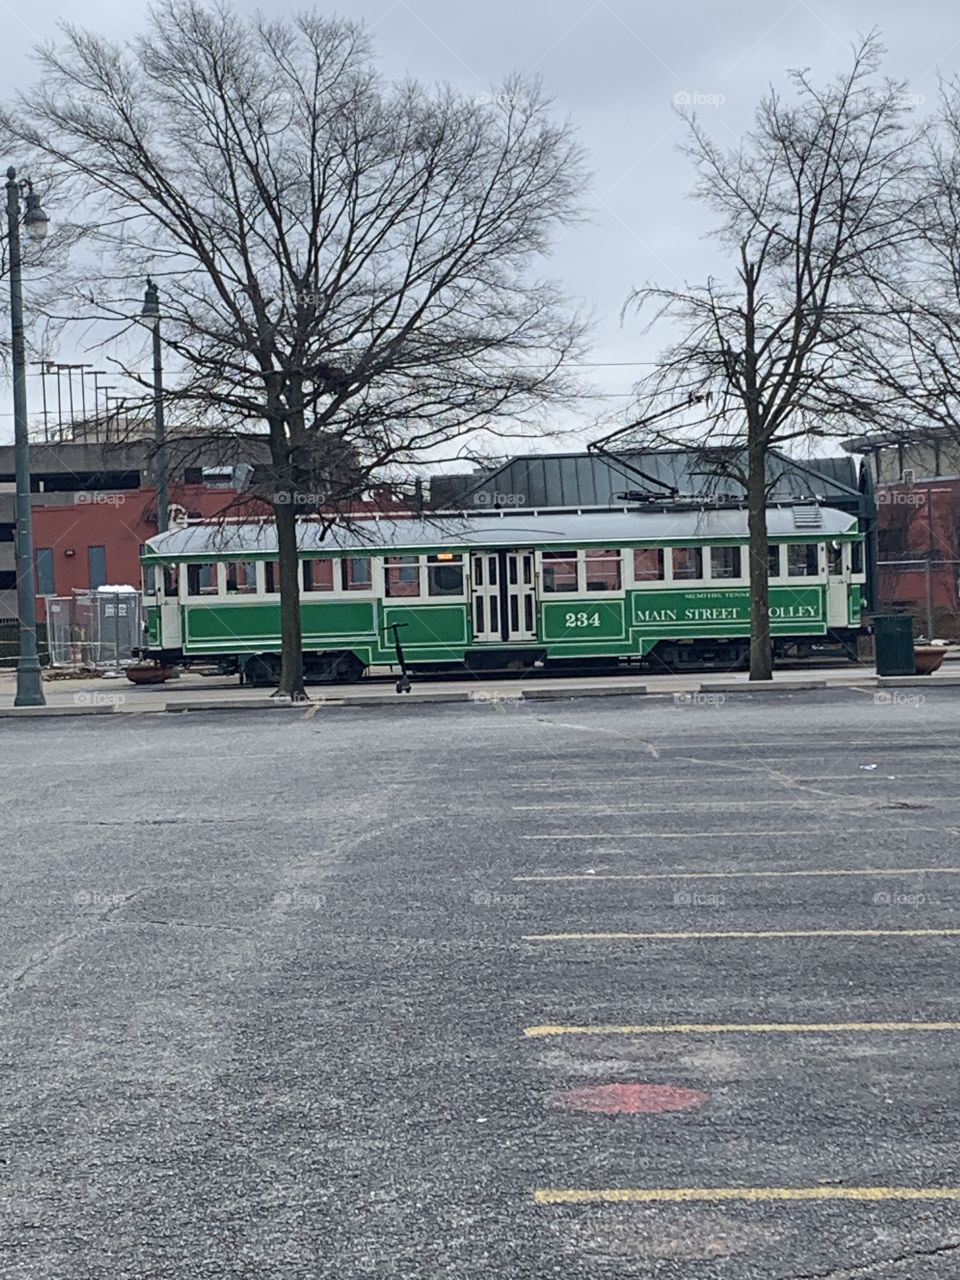 Trolley cars of Memphis